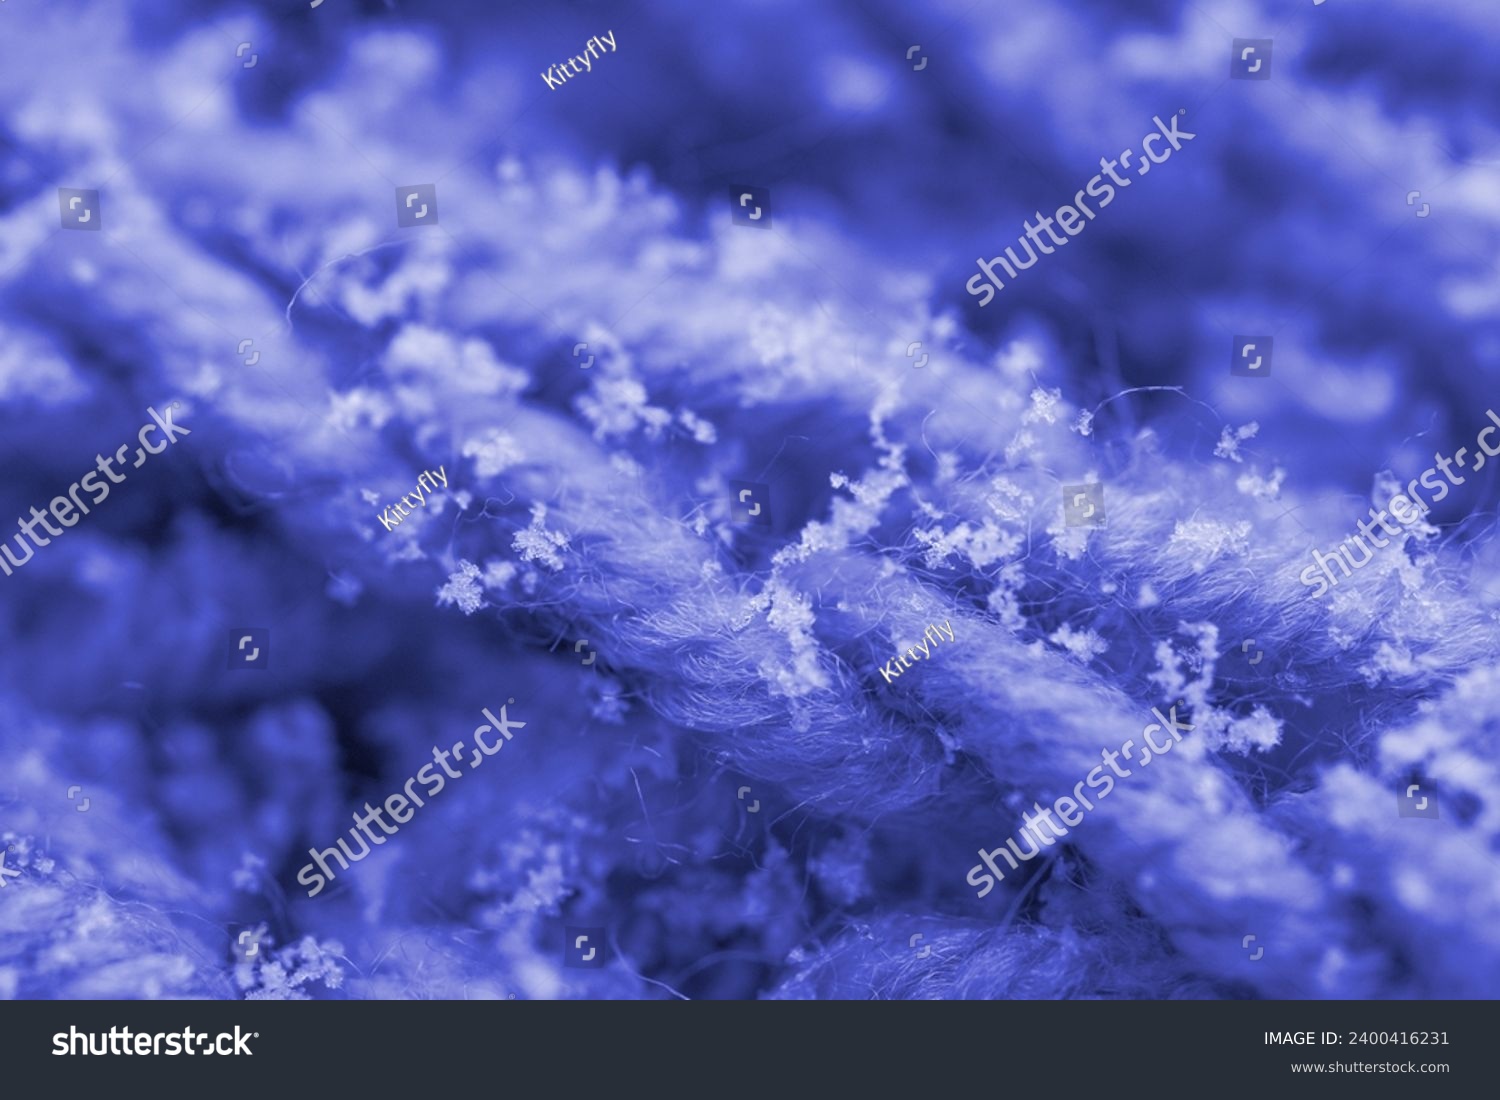 Delicate white snowflakes gently descend onto woolen knitted background, macro detail, winter romance and meteorological phenomena, seasonal changes #2400416231